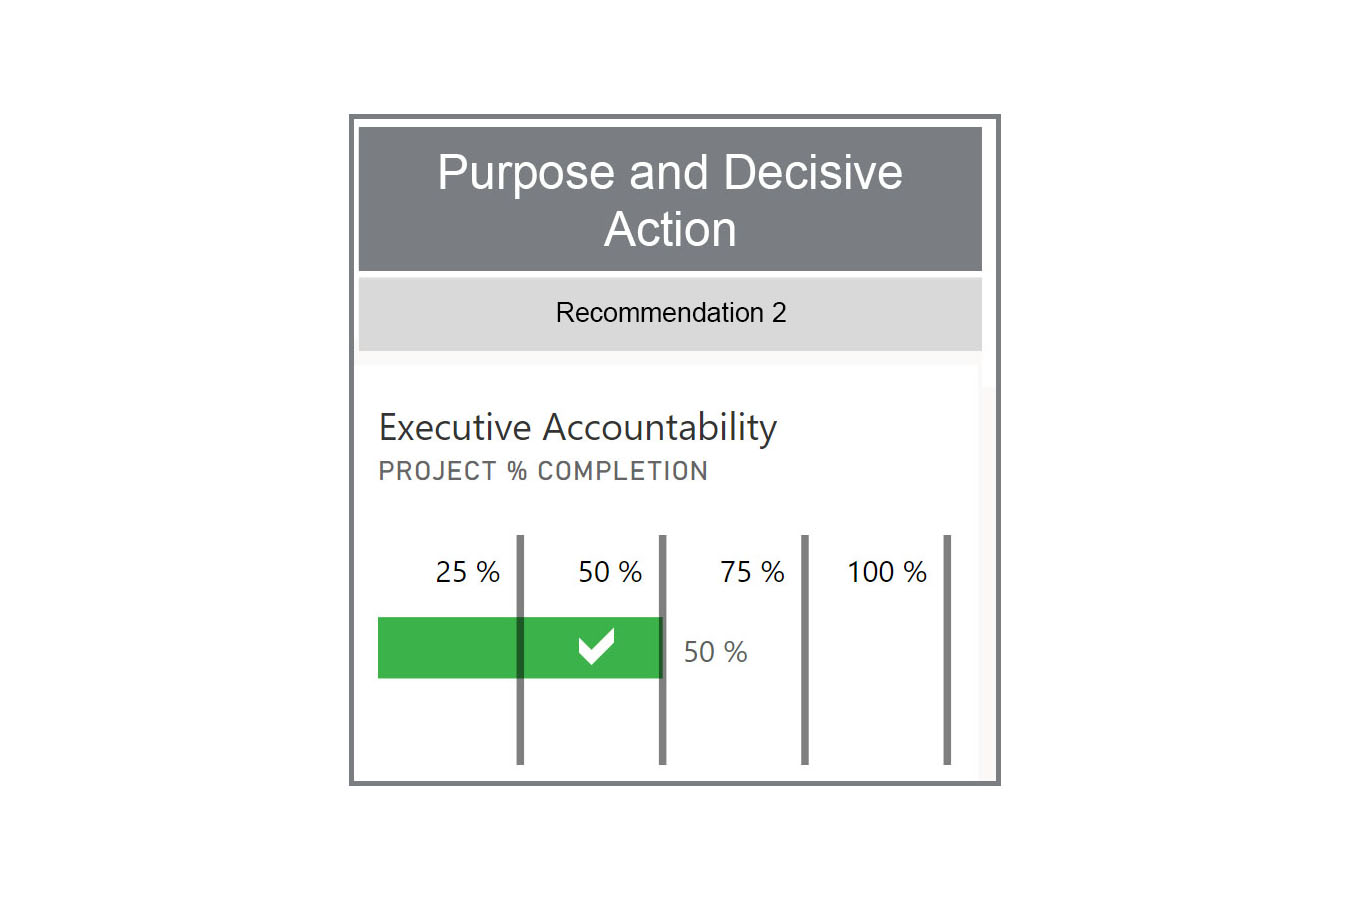 Purpose and Decisive Action Recommendation 2 graphic